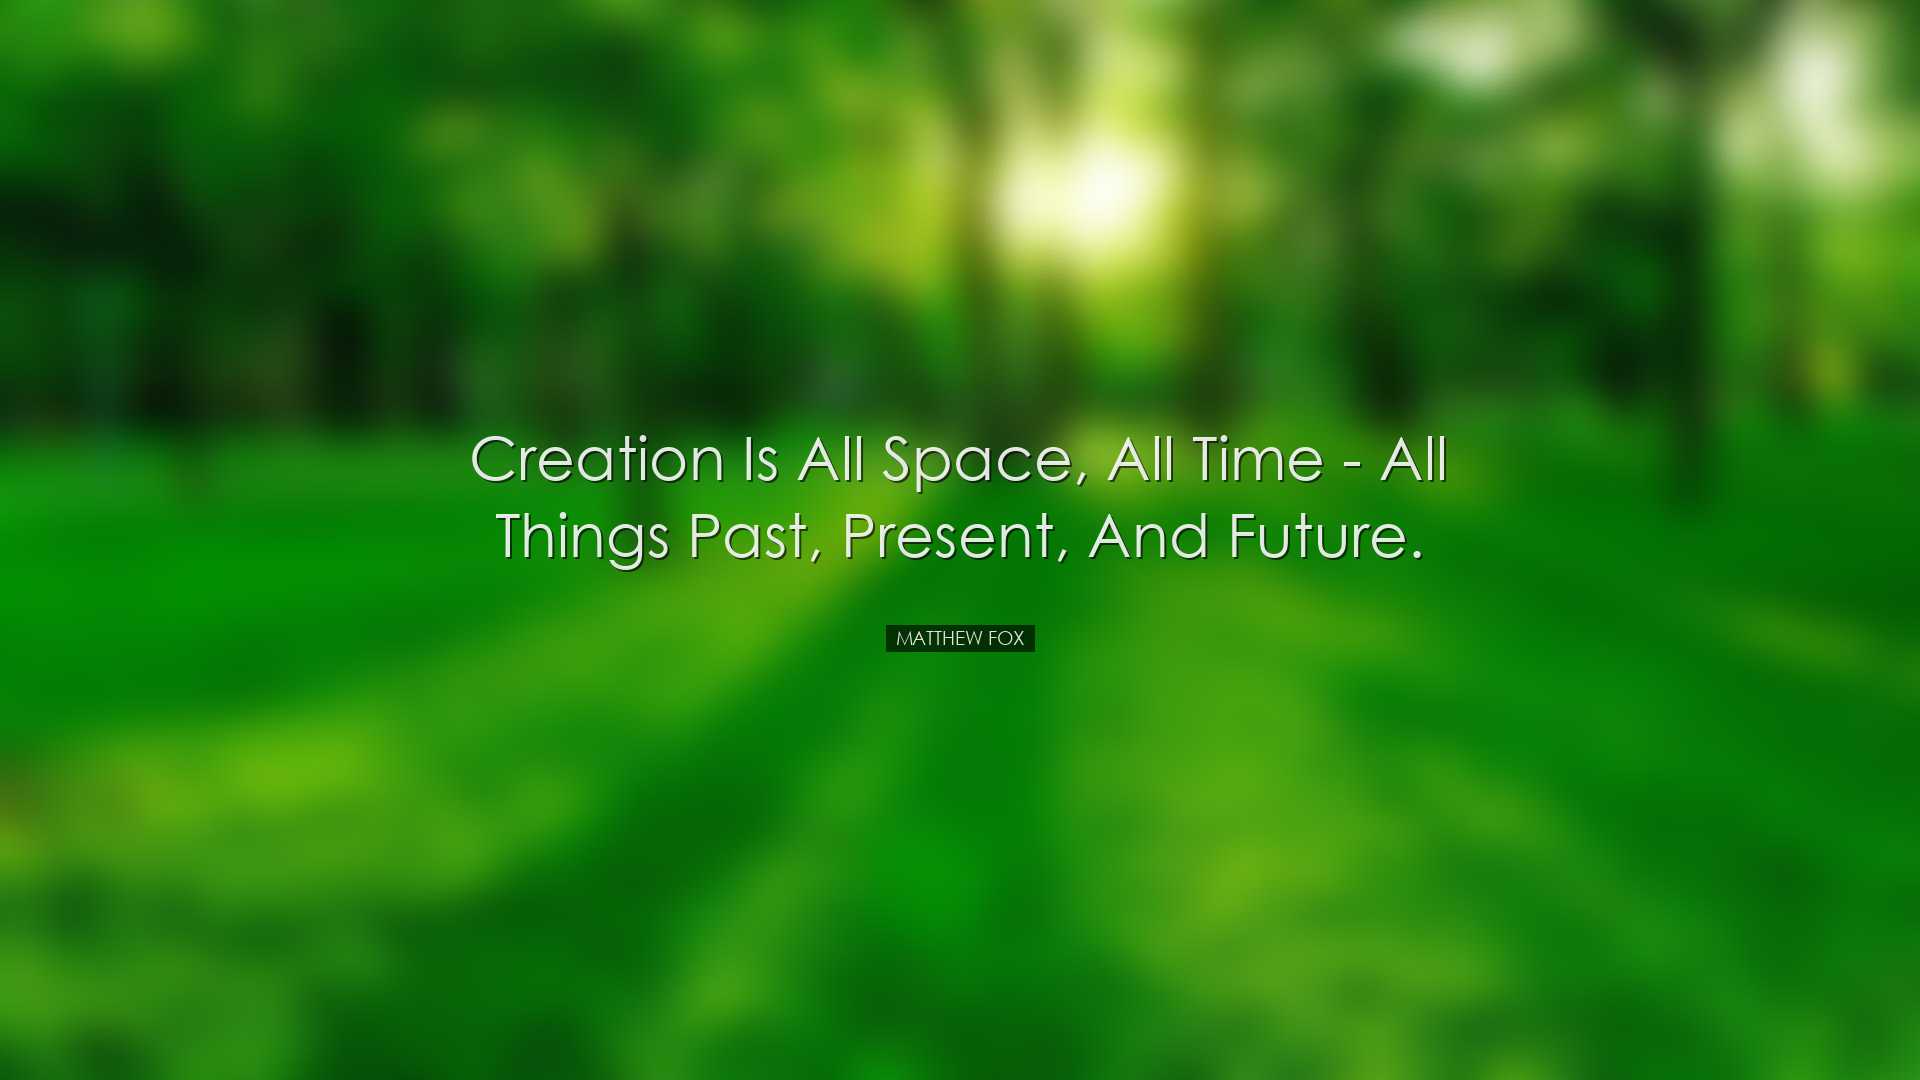 Creation is all space, all time - all things past, present, and fu